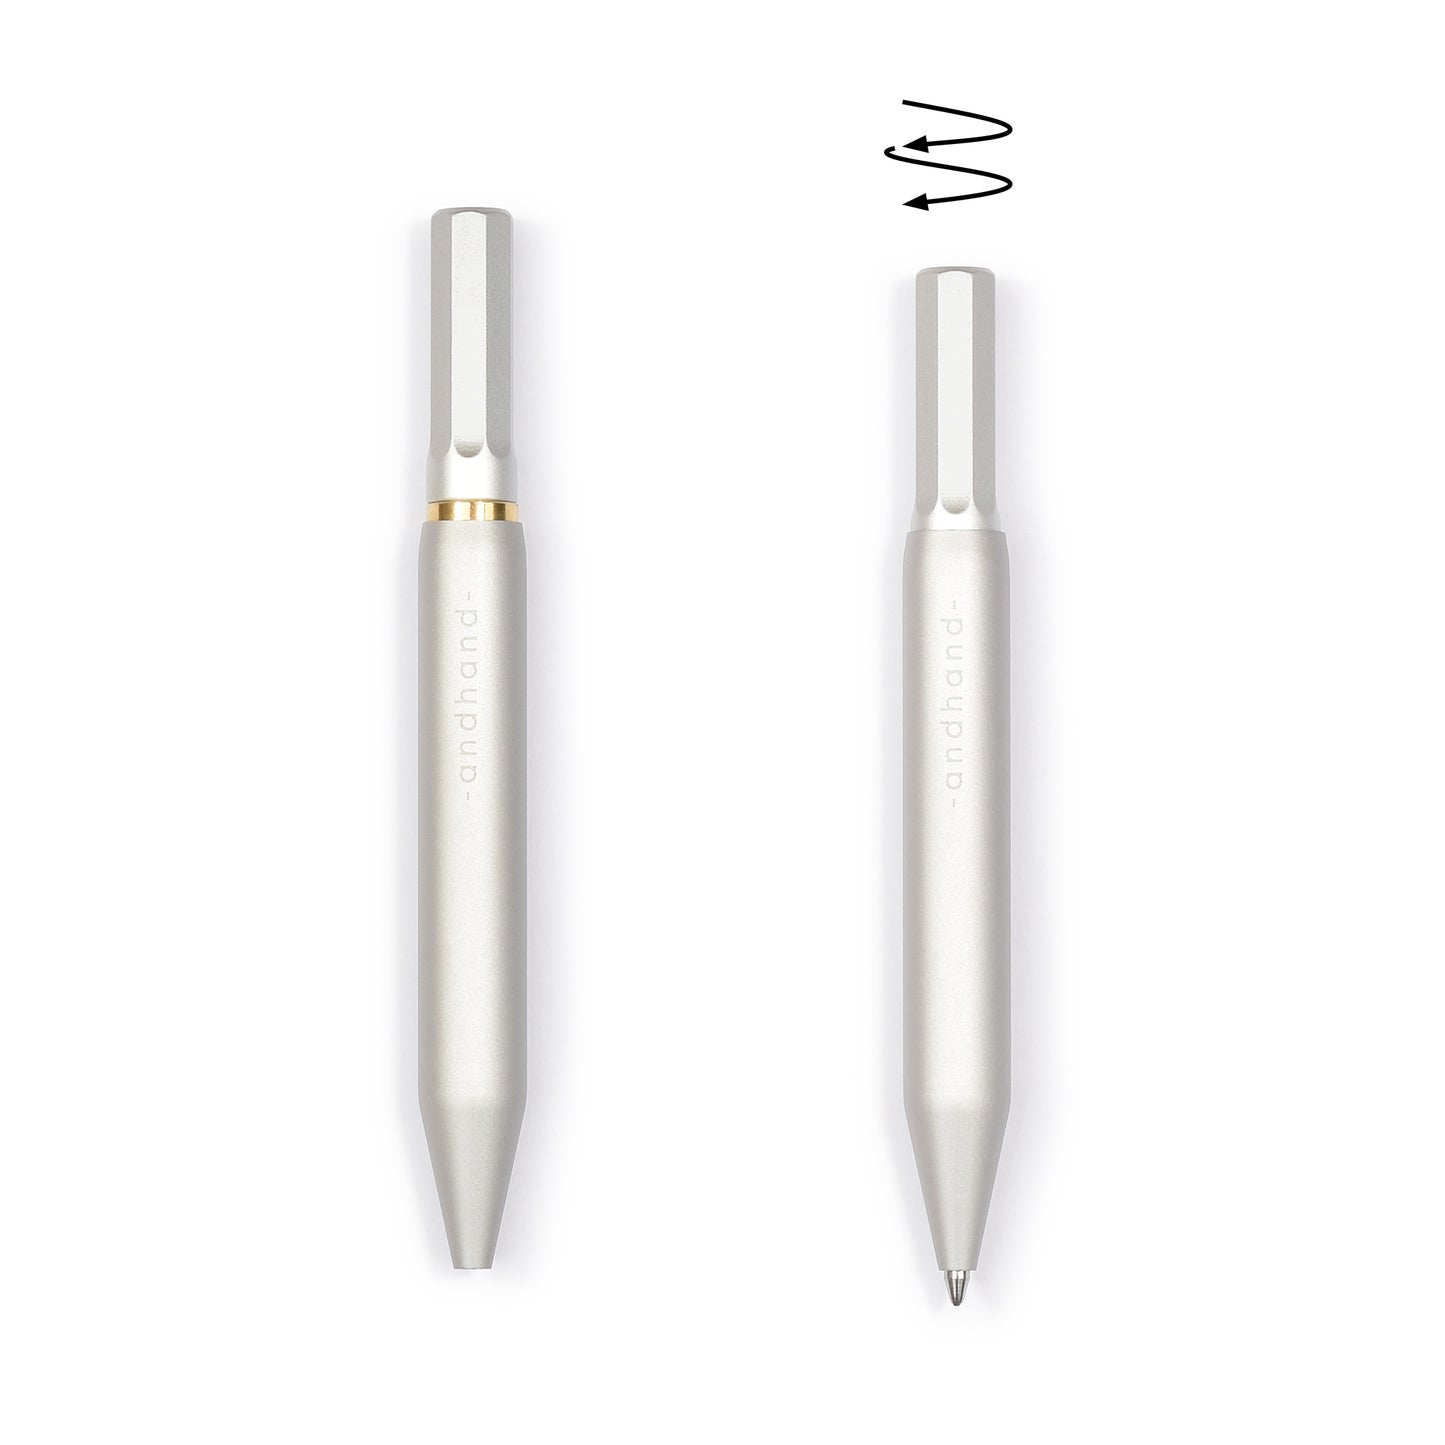 Aluminium and brass everyday carry ballpoint pen from Andhand. An expert compact writing tool with a smooth mechanism and modern minimal design. Amazingly durable and refined 4 inch pen. Shown here in silver lustre anodized finish.